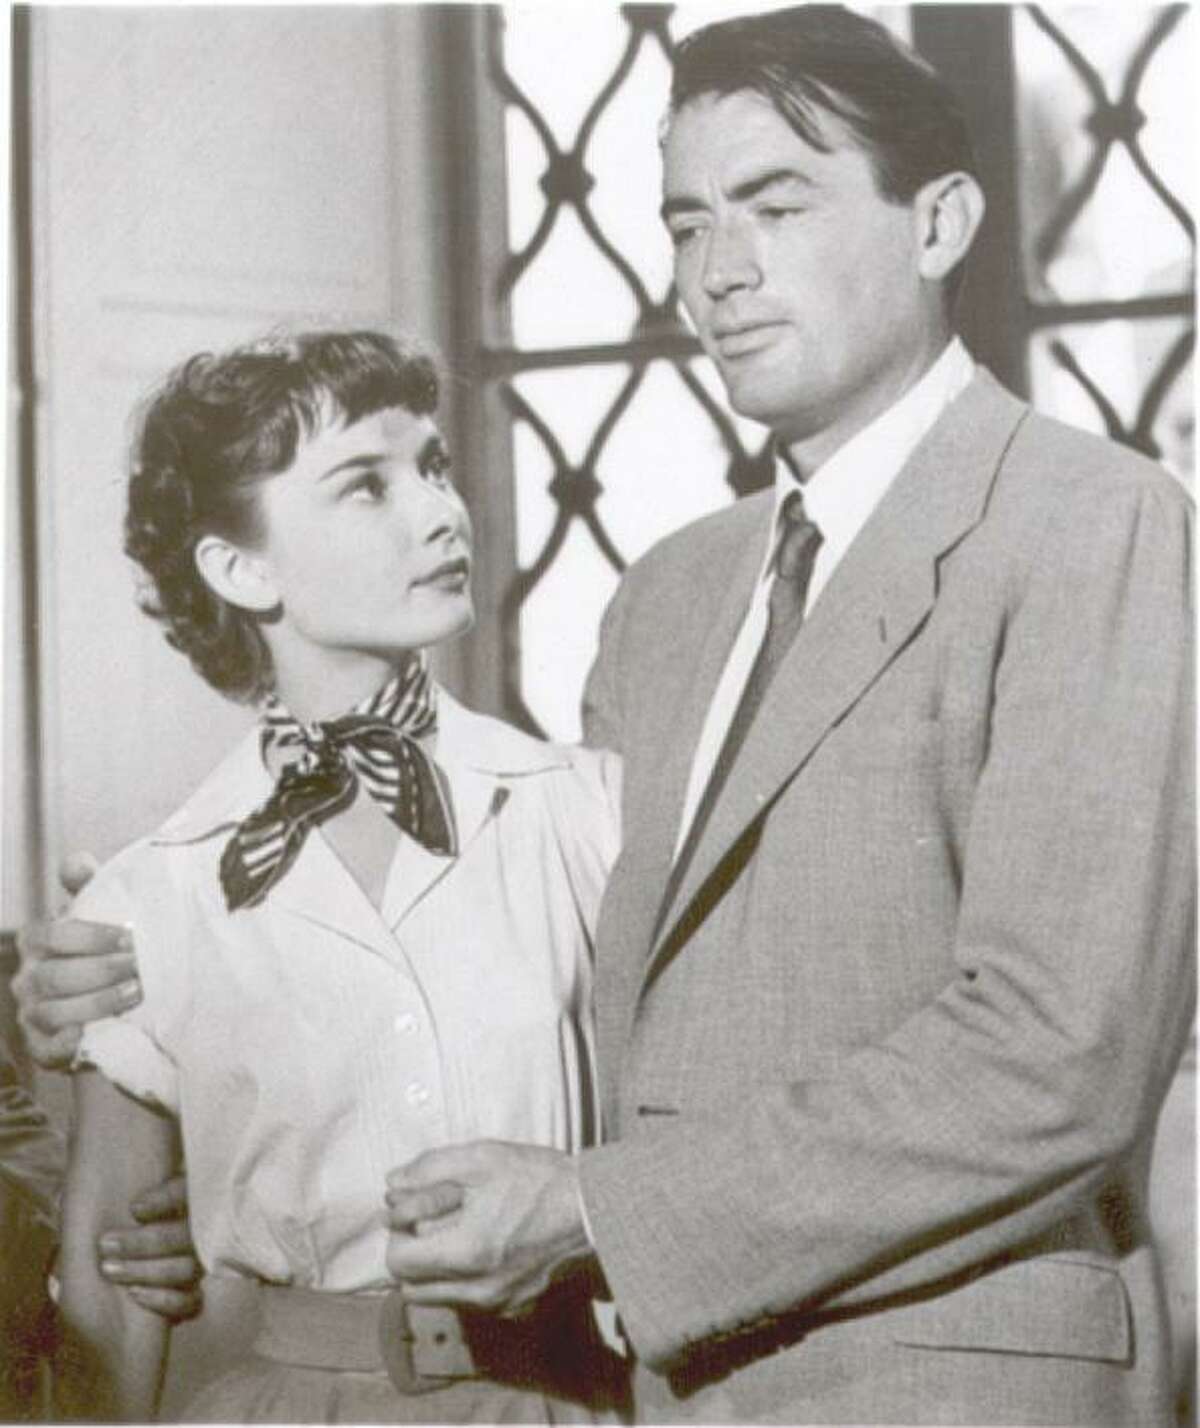 Audrey Hepburn and Gregory Peck in a scene from “Roman Holiday.”